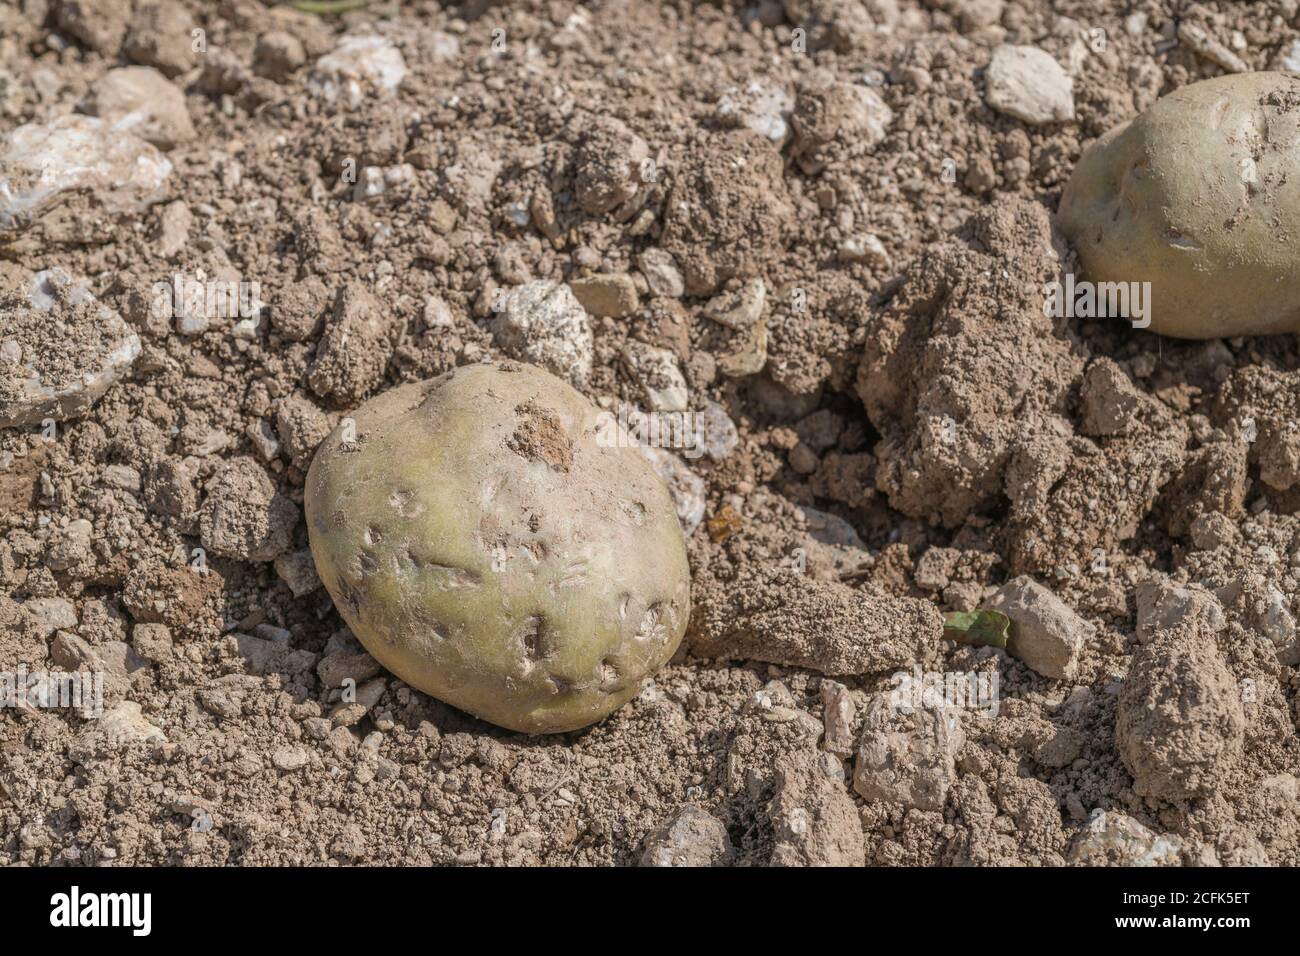 Damaged potato crop / potato tuber. Discarded potato appears to have impressions in skin that look as if it has been pressed by stones in soil. Stock Photo